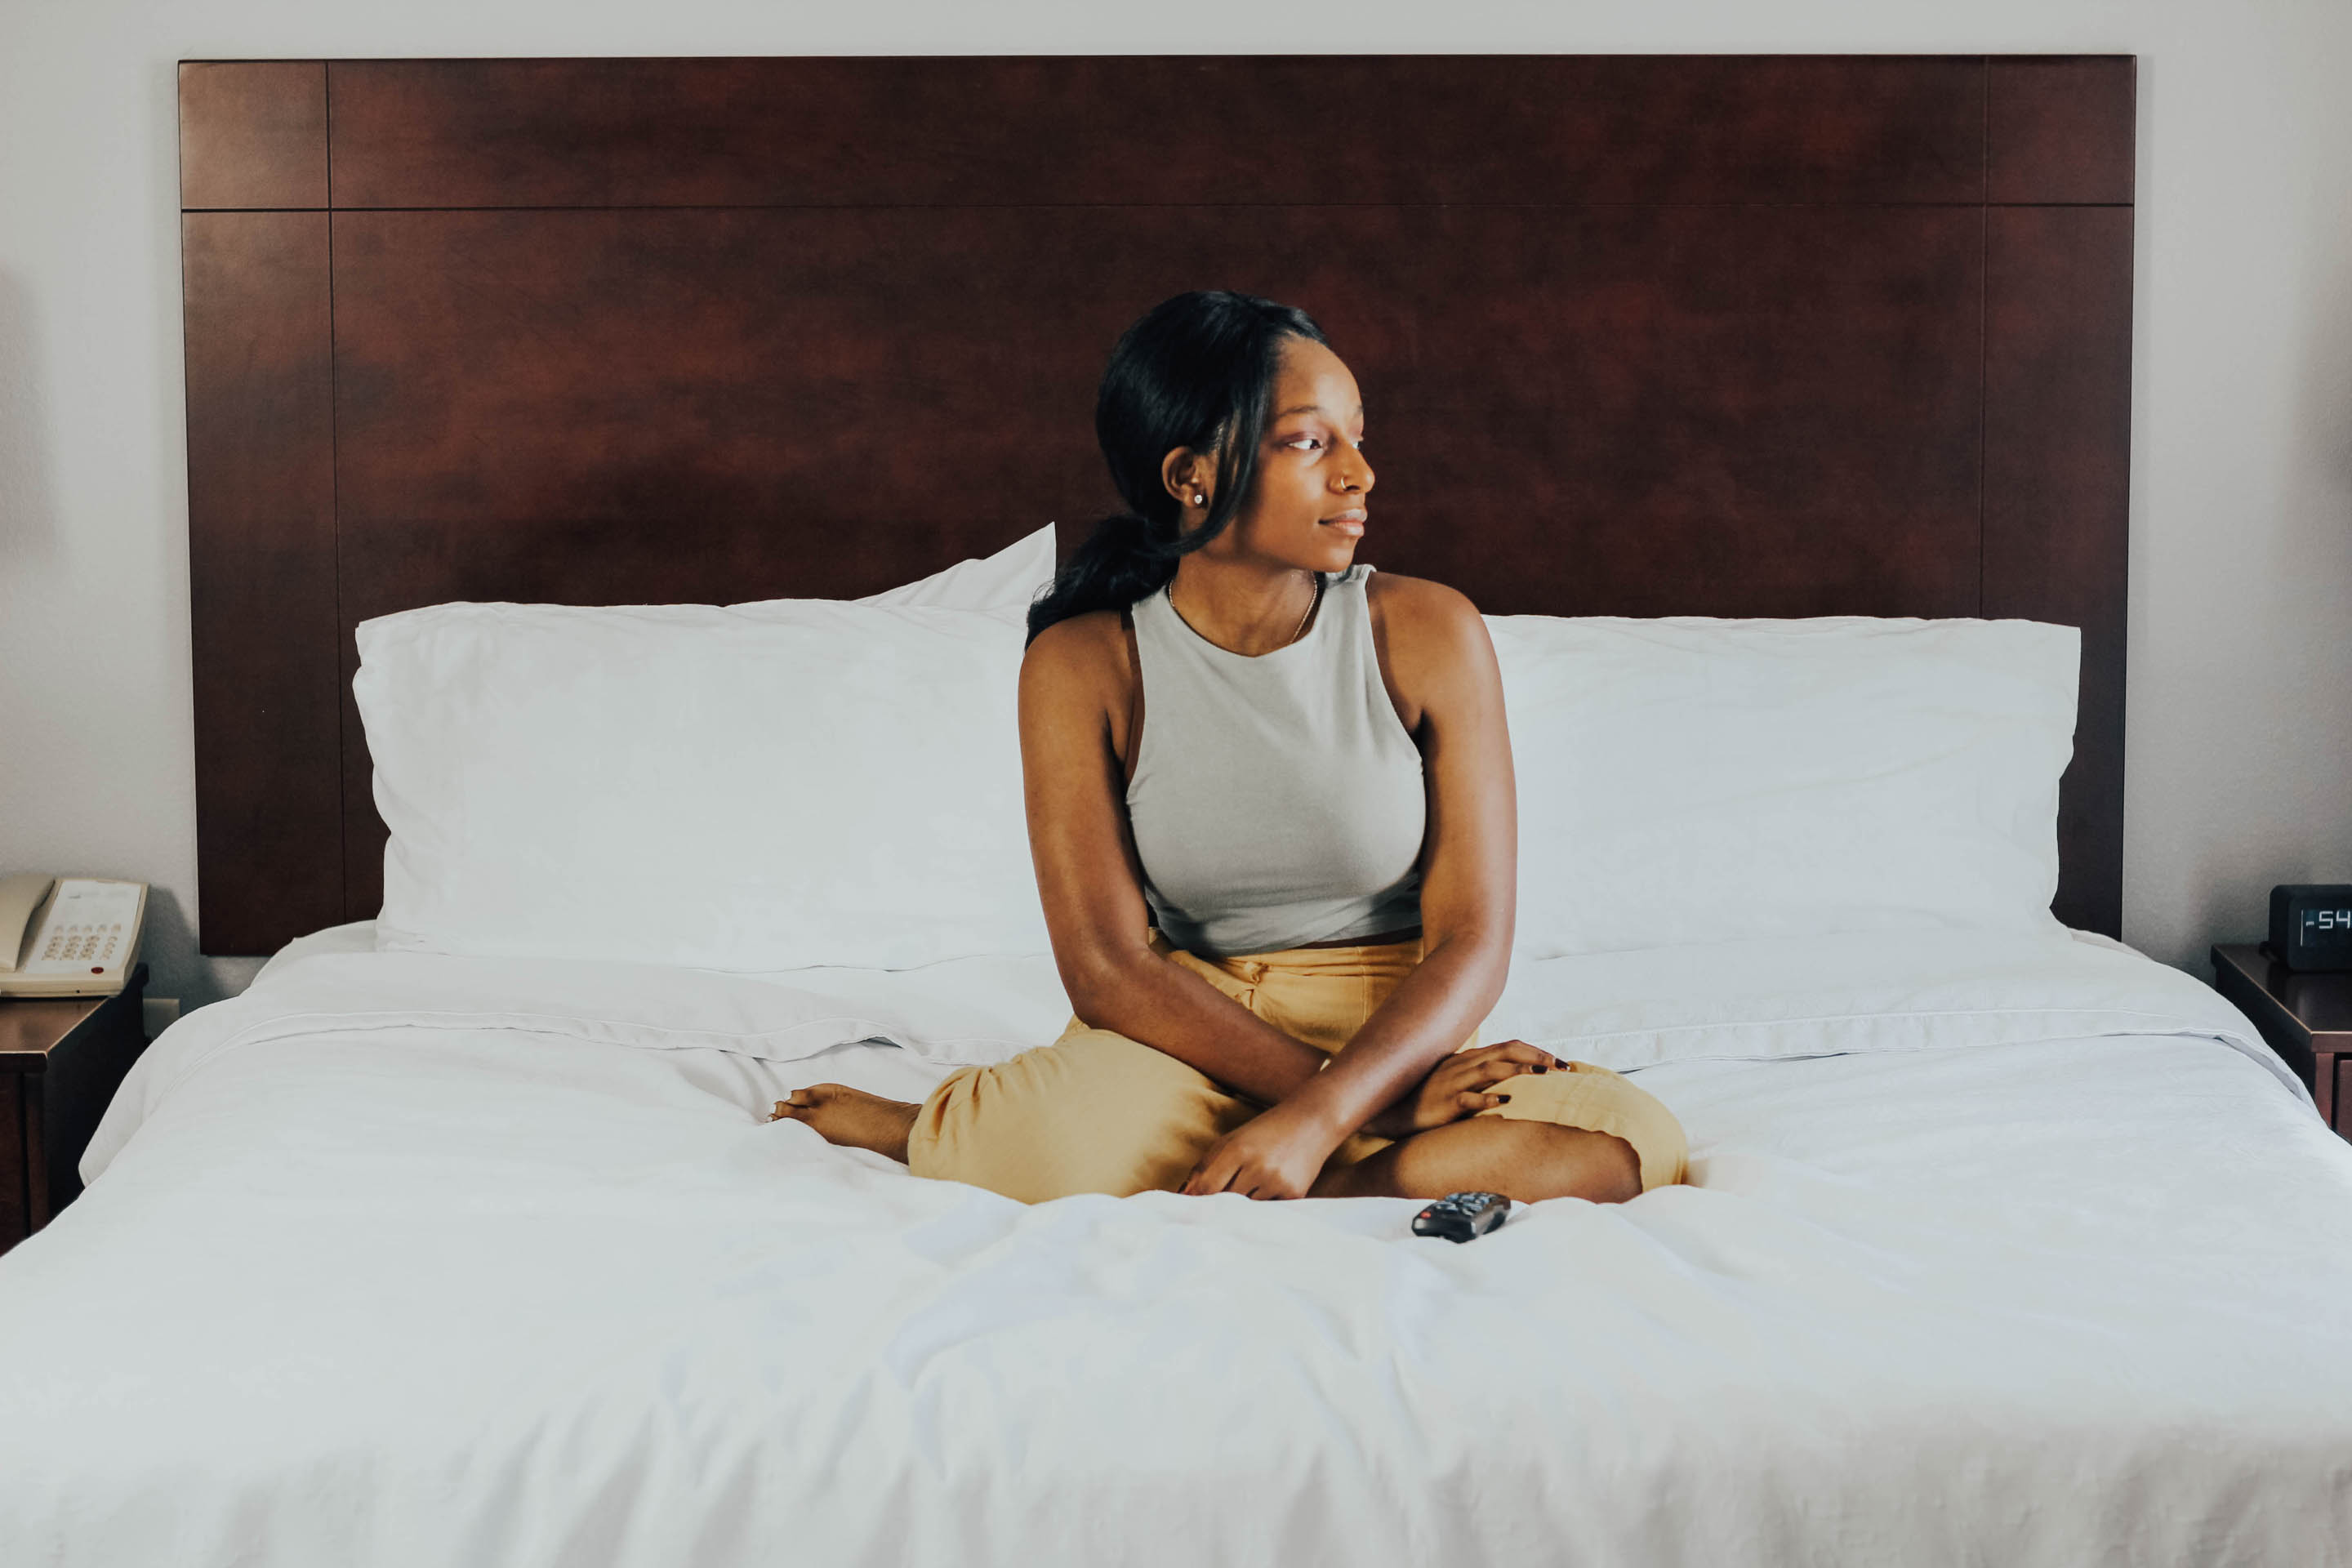 Photo of African American woman dressed in gray tank and tan pants, seated on a kingsized white bed with a dark brown wall-mounted wooden headboard.